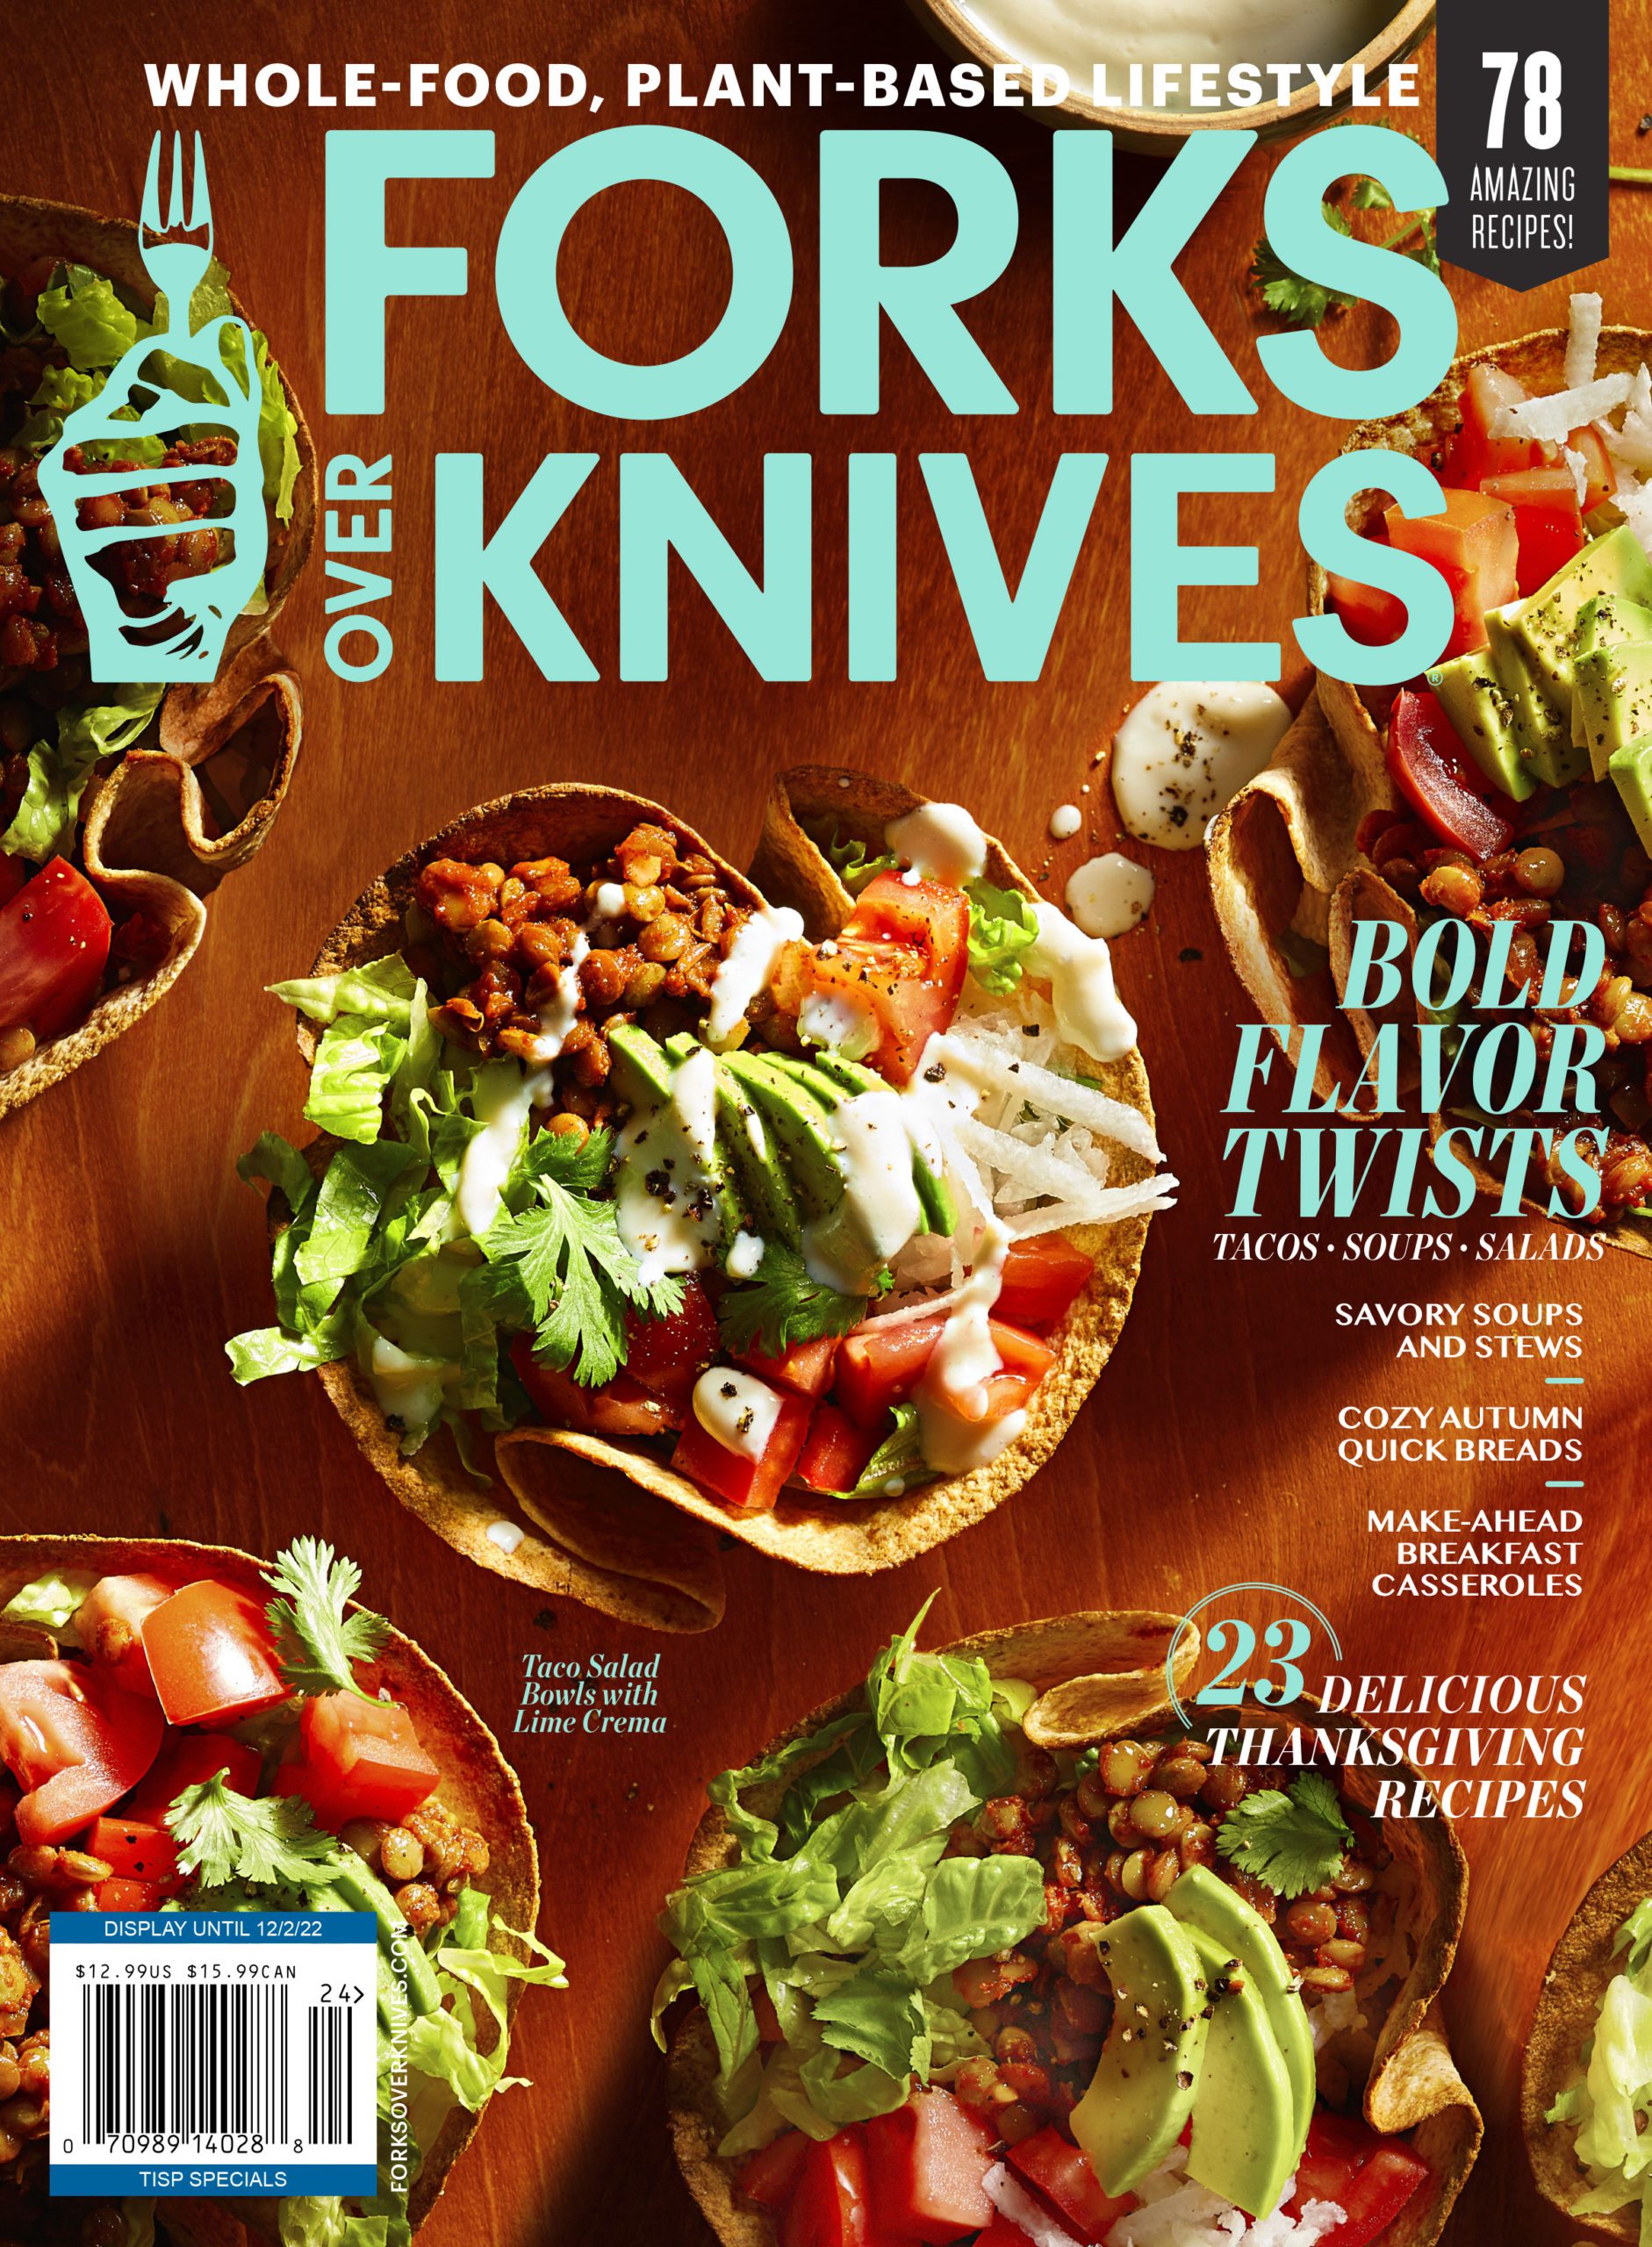 Forks Over Knives Fall 2022 magazine cover featuring taco salads in tortilla bowls